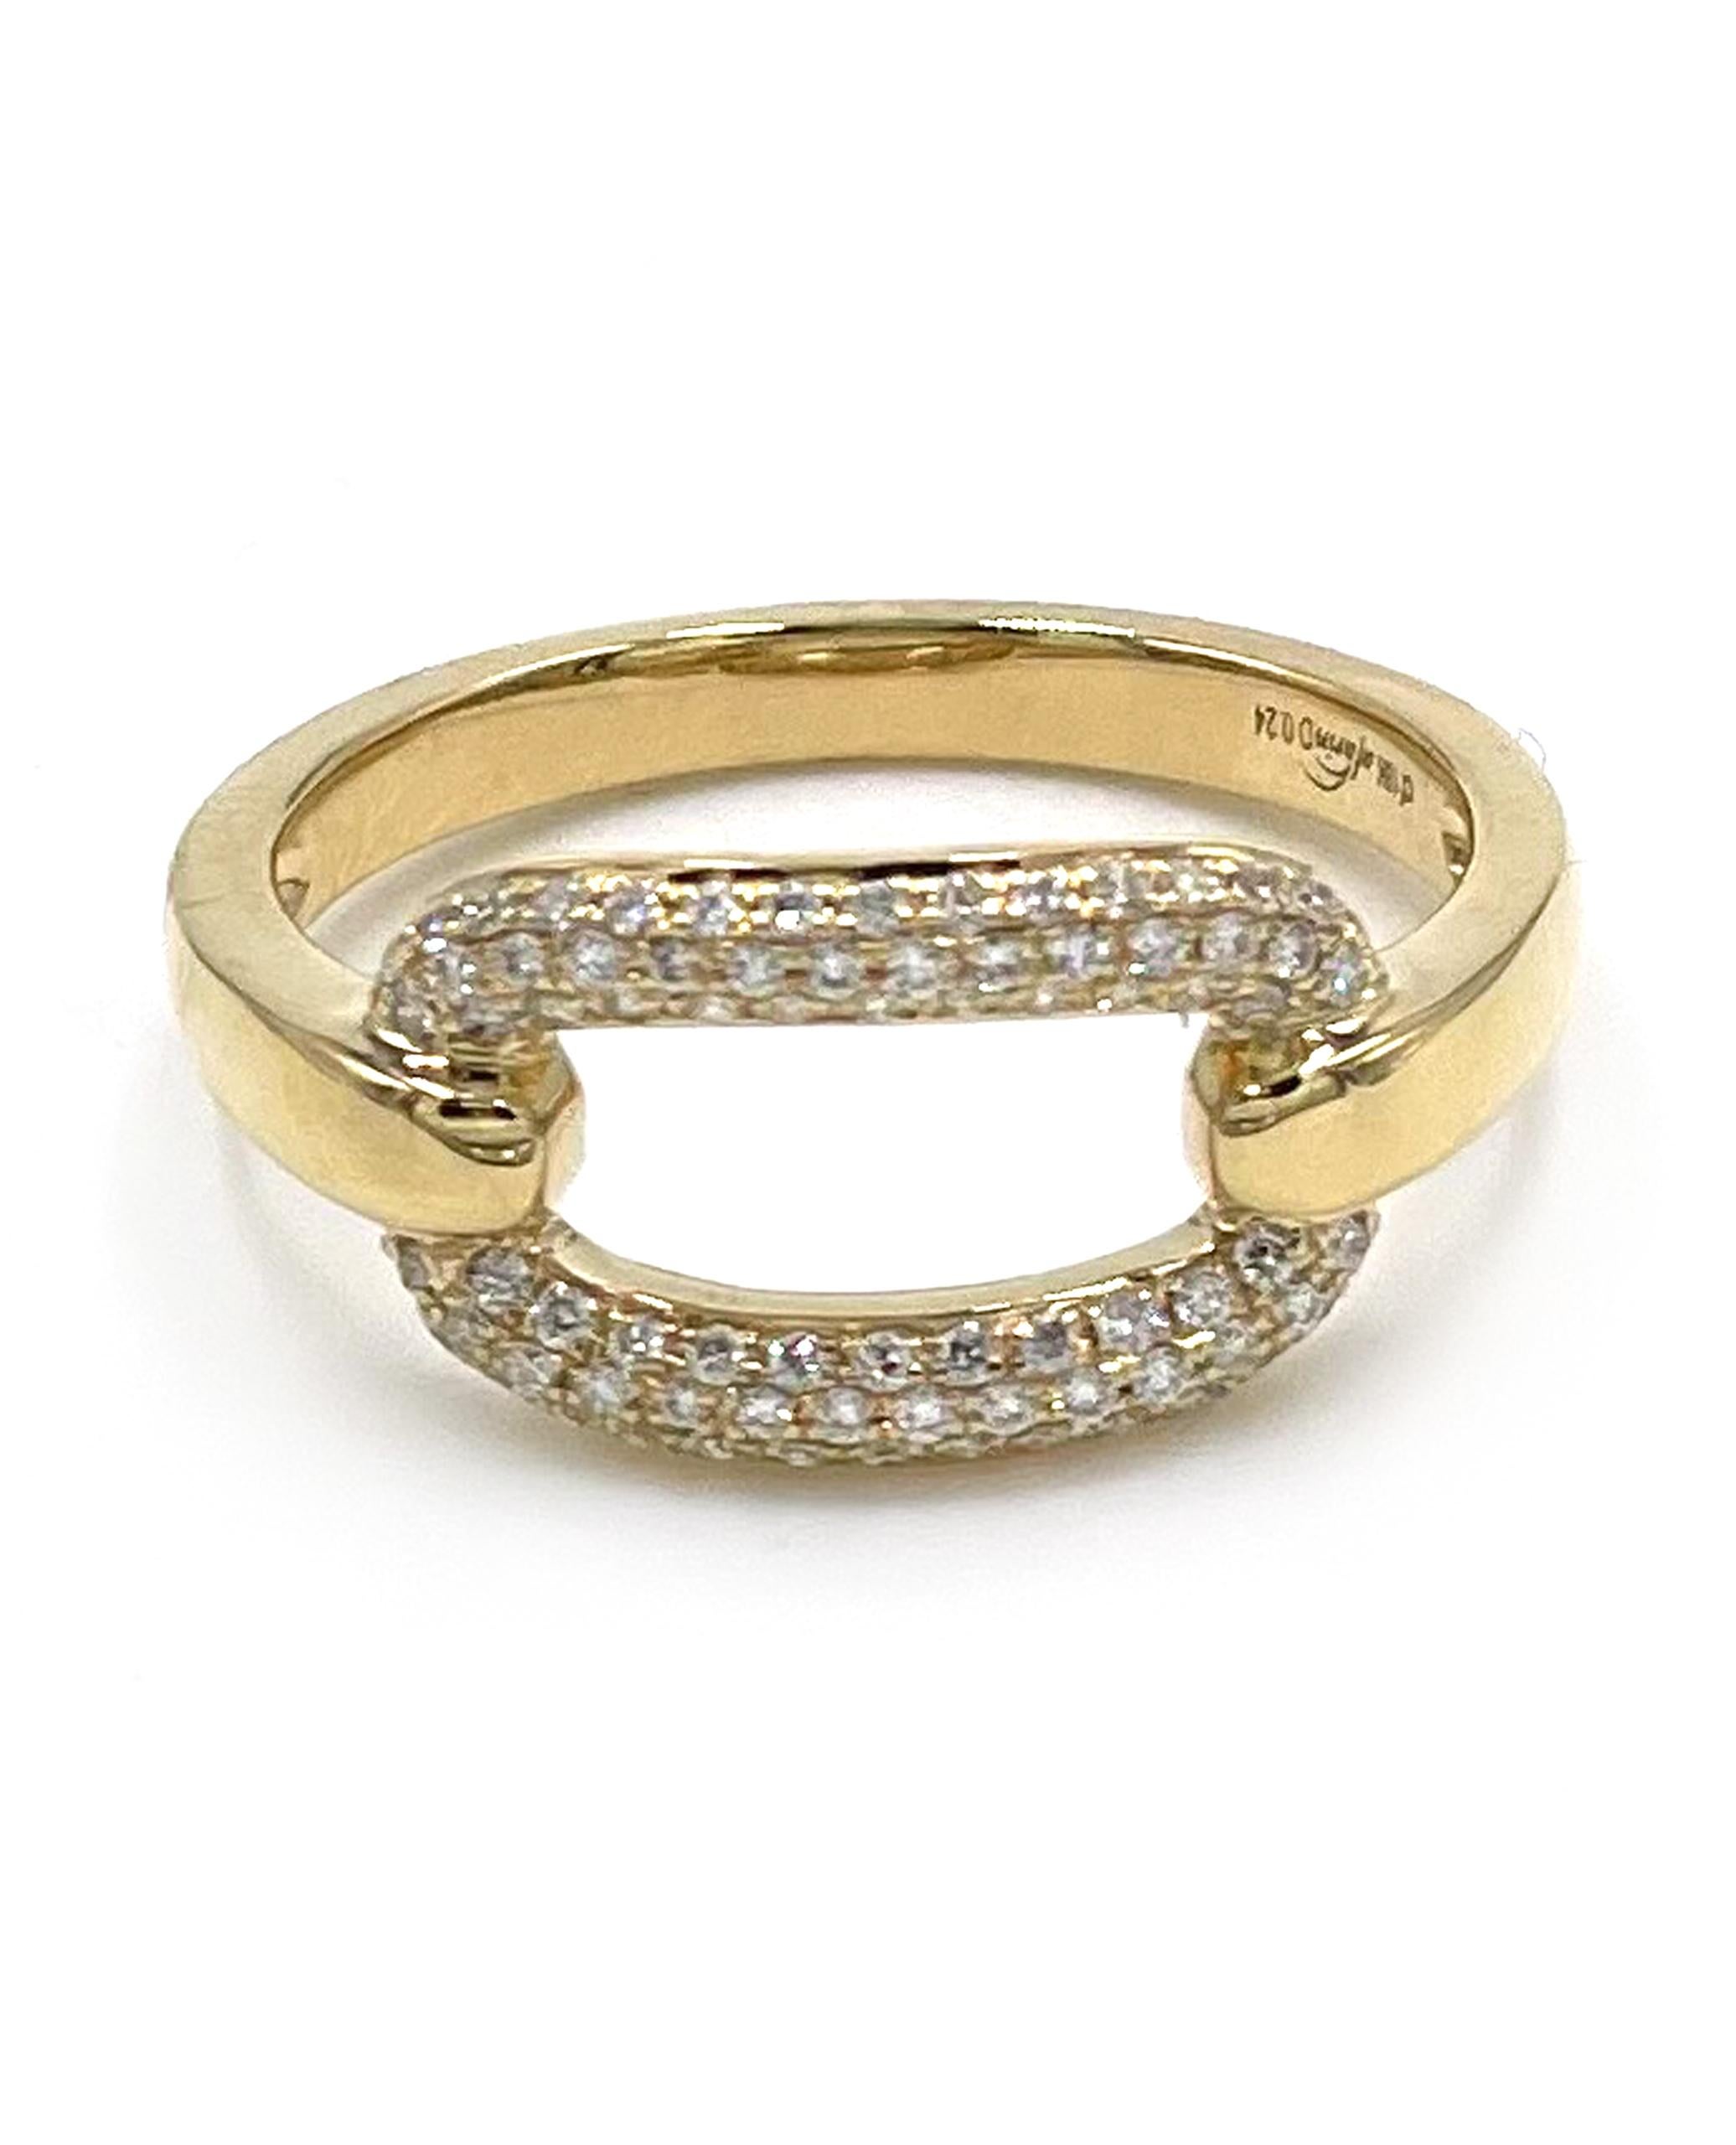 The perfect modern everyday ring. This 18K yellow gold open link ring is furnished with round brilliant-cut diamonds weighing a total of 0.25 carat.

* Diamonds are G/H color, VS2/SI1 clarity.
* Finger size 6.5